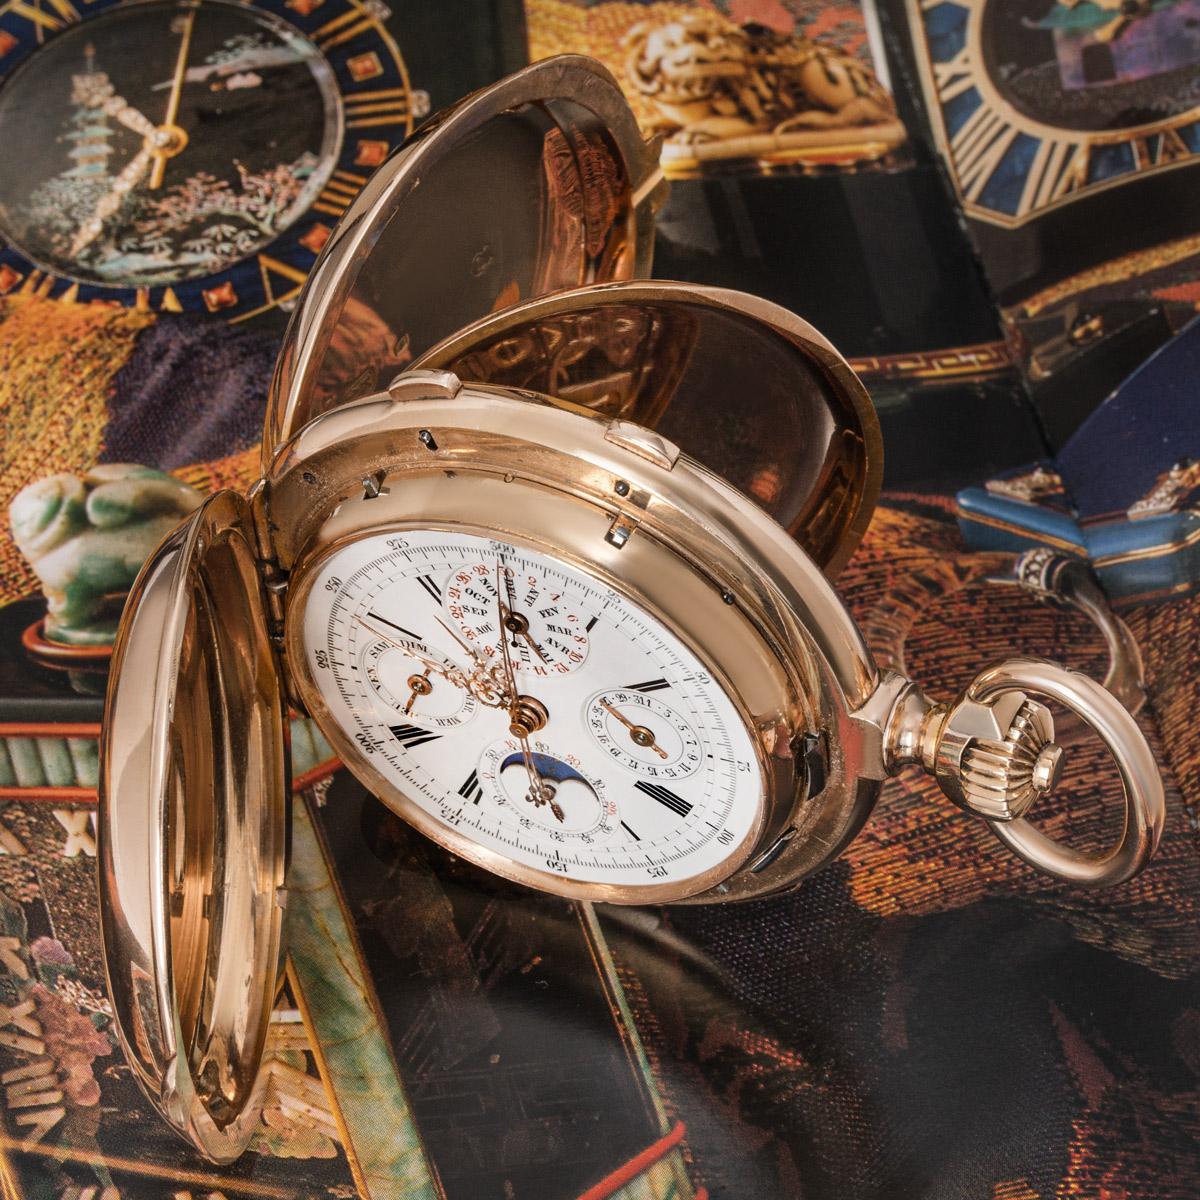 lecoultre minute repeater pocket watch